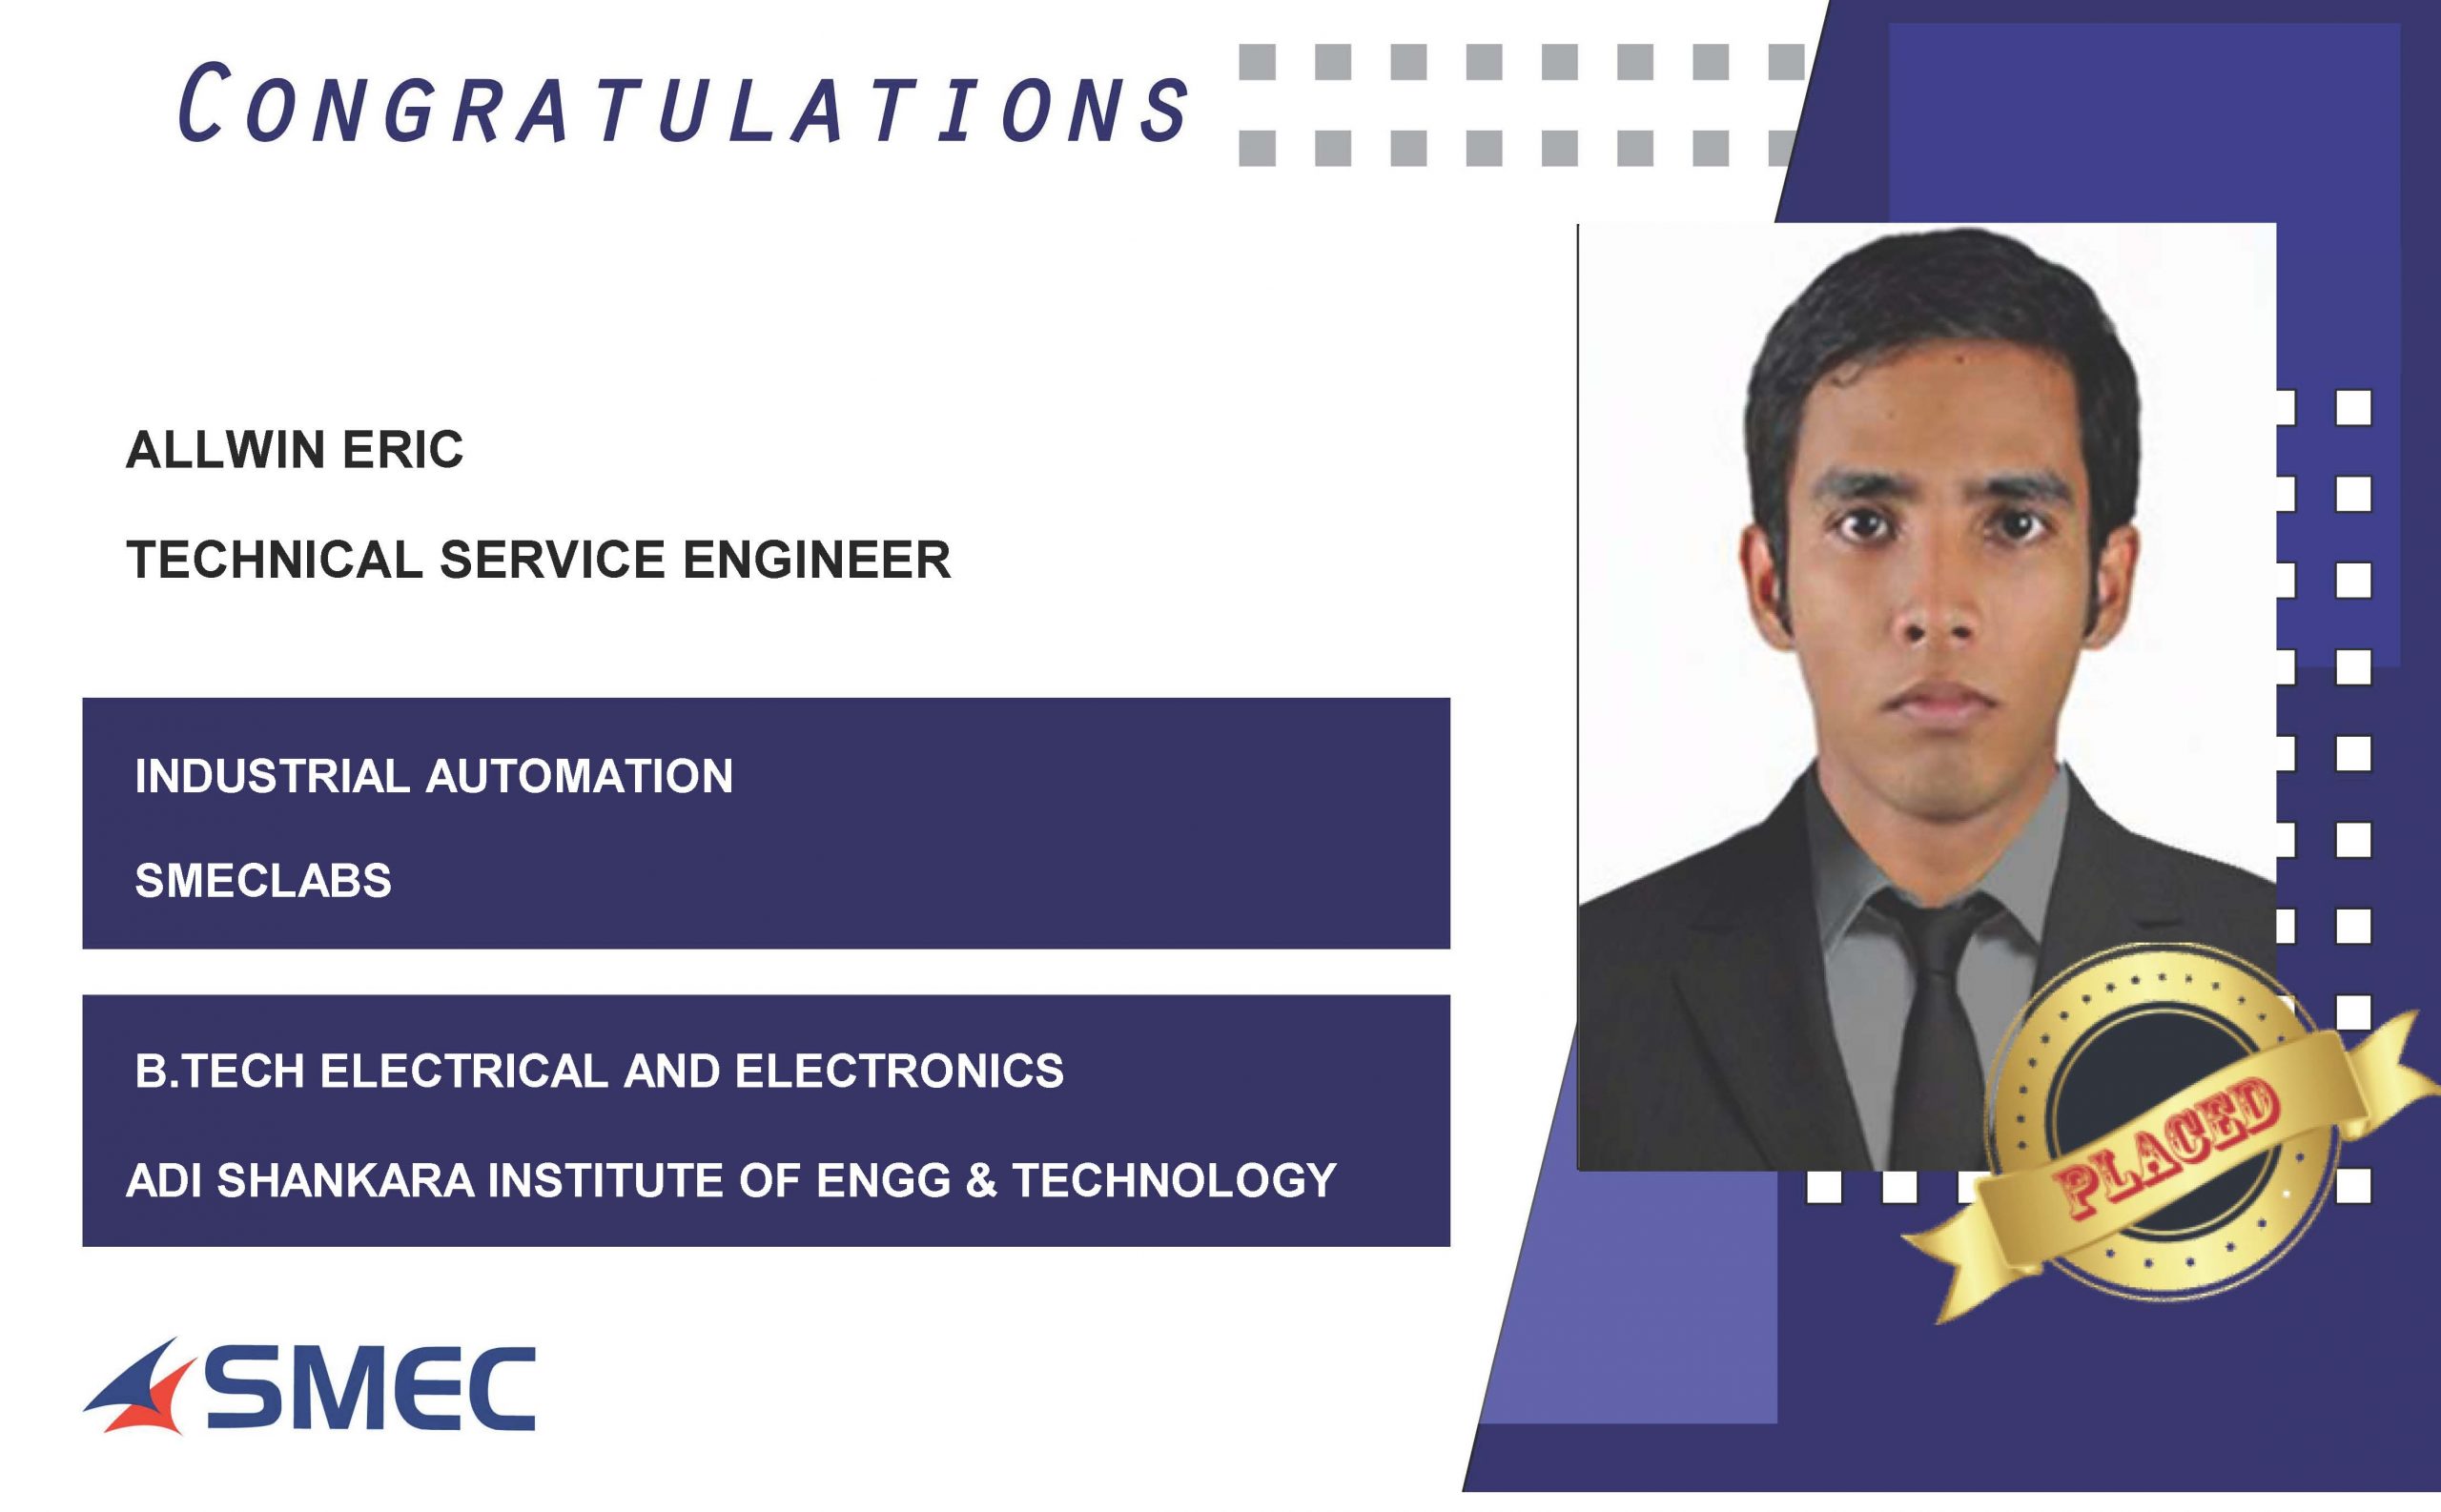 Allwin Eric Placed as Service Engineer